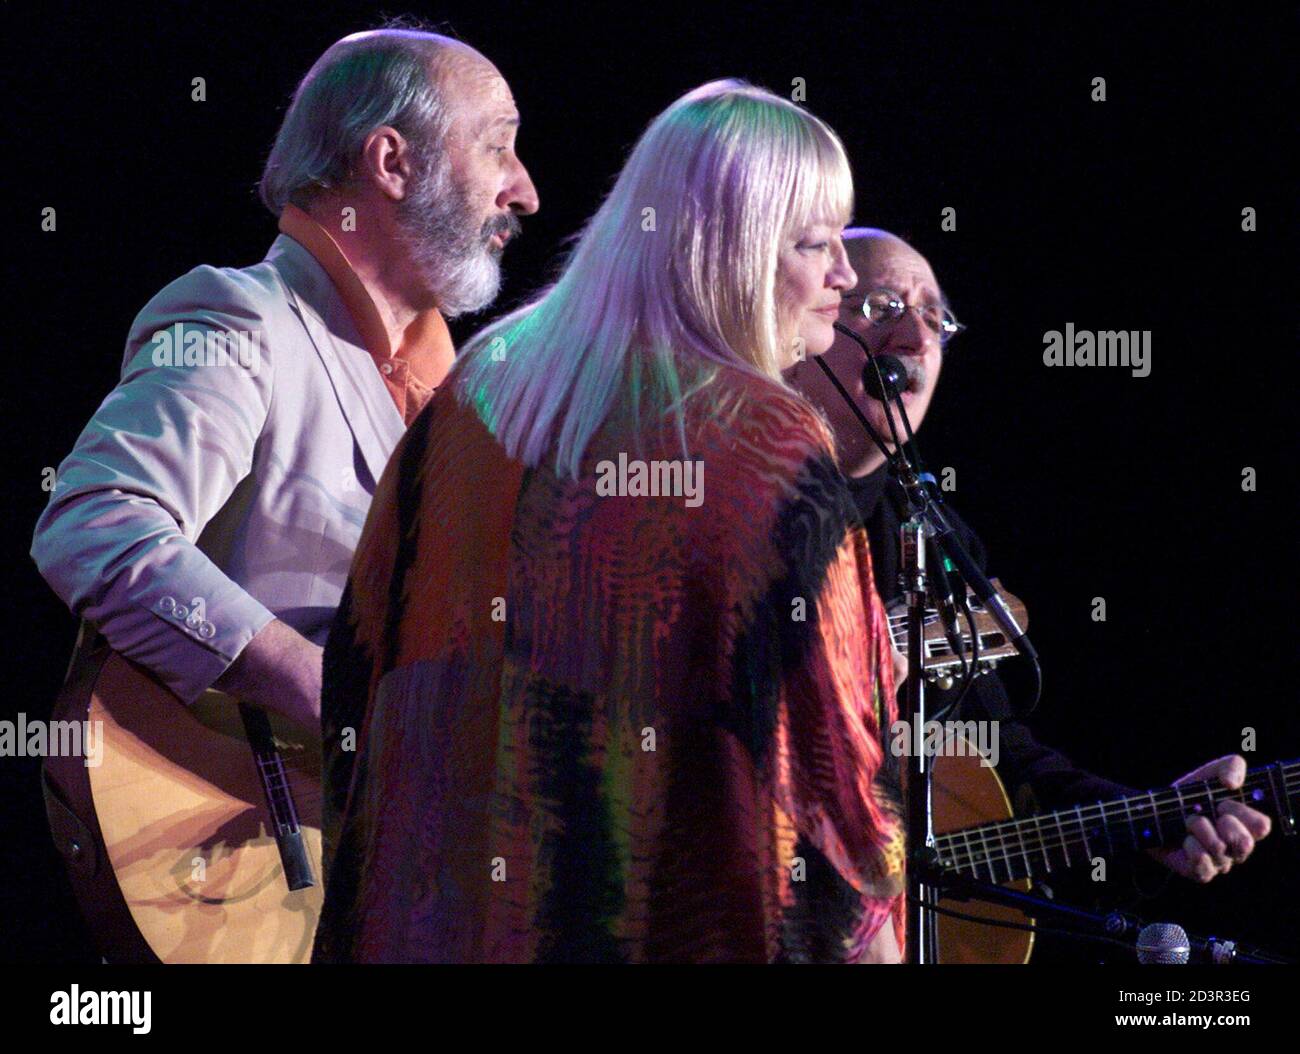 Legendary American folk music pioneeers Peter, Paul & Mary perform during their frist concert in Hong Kong late March 9, 2001. The group is composed of Noel Paul Stookey (L), Mary Travers (C) and Peter Yarrow. Banque D'Images